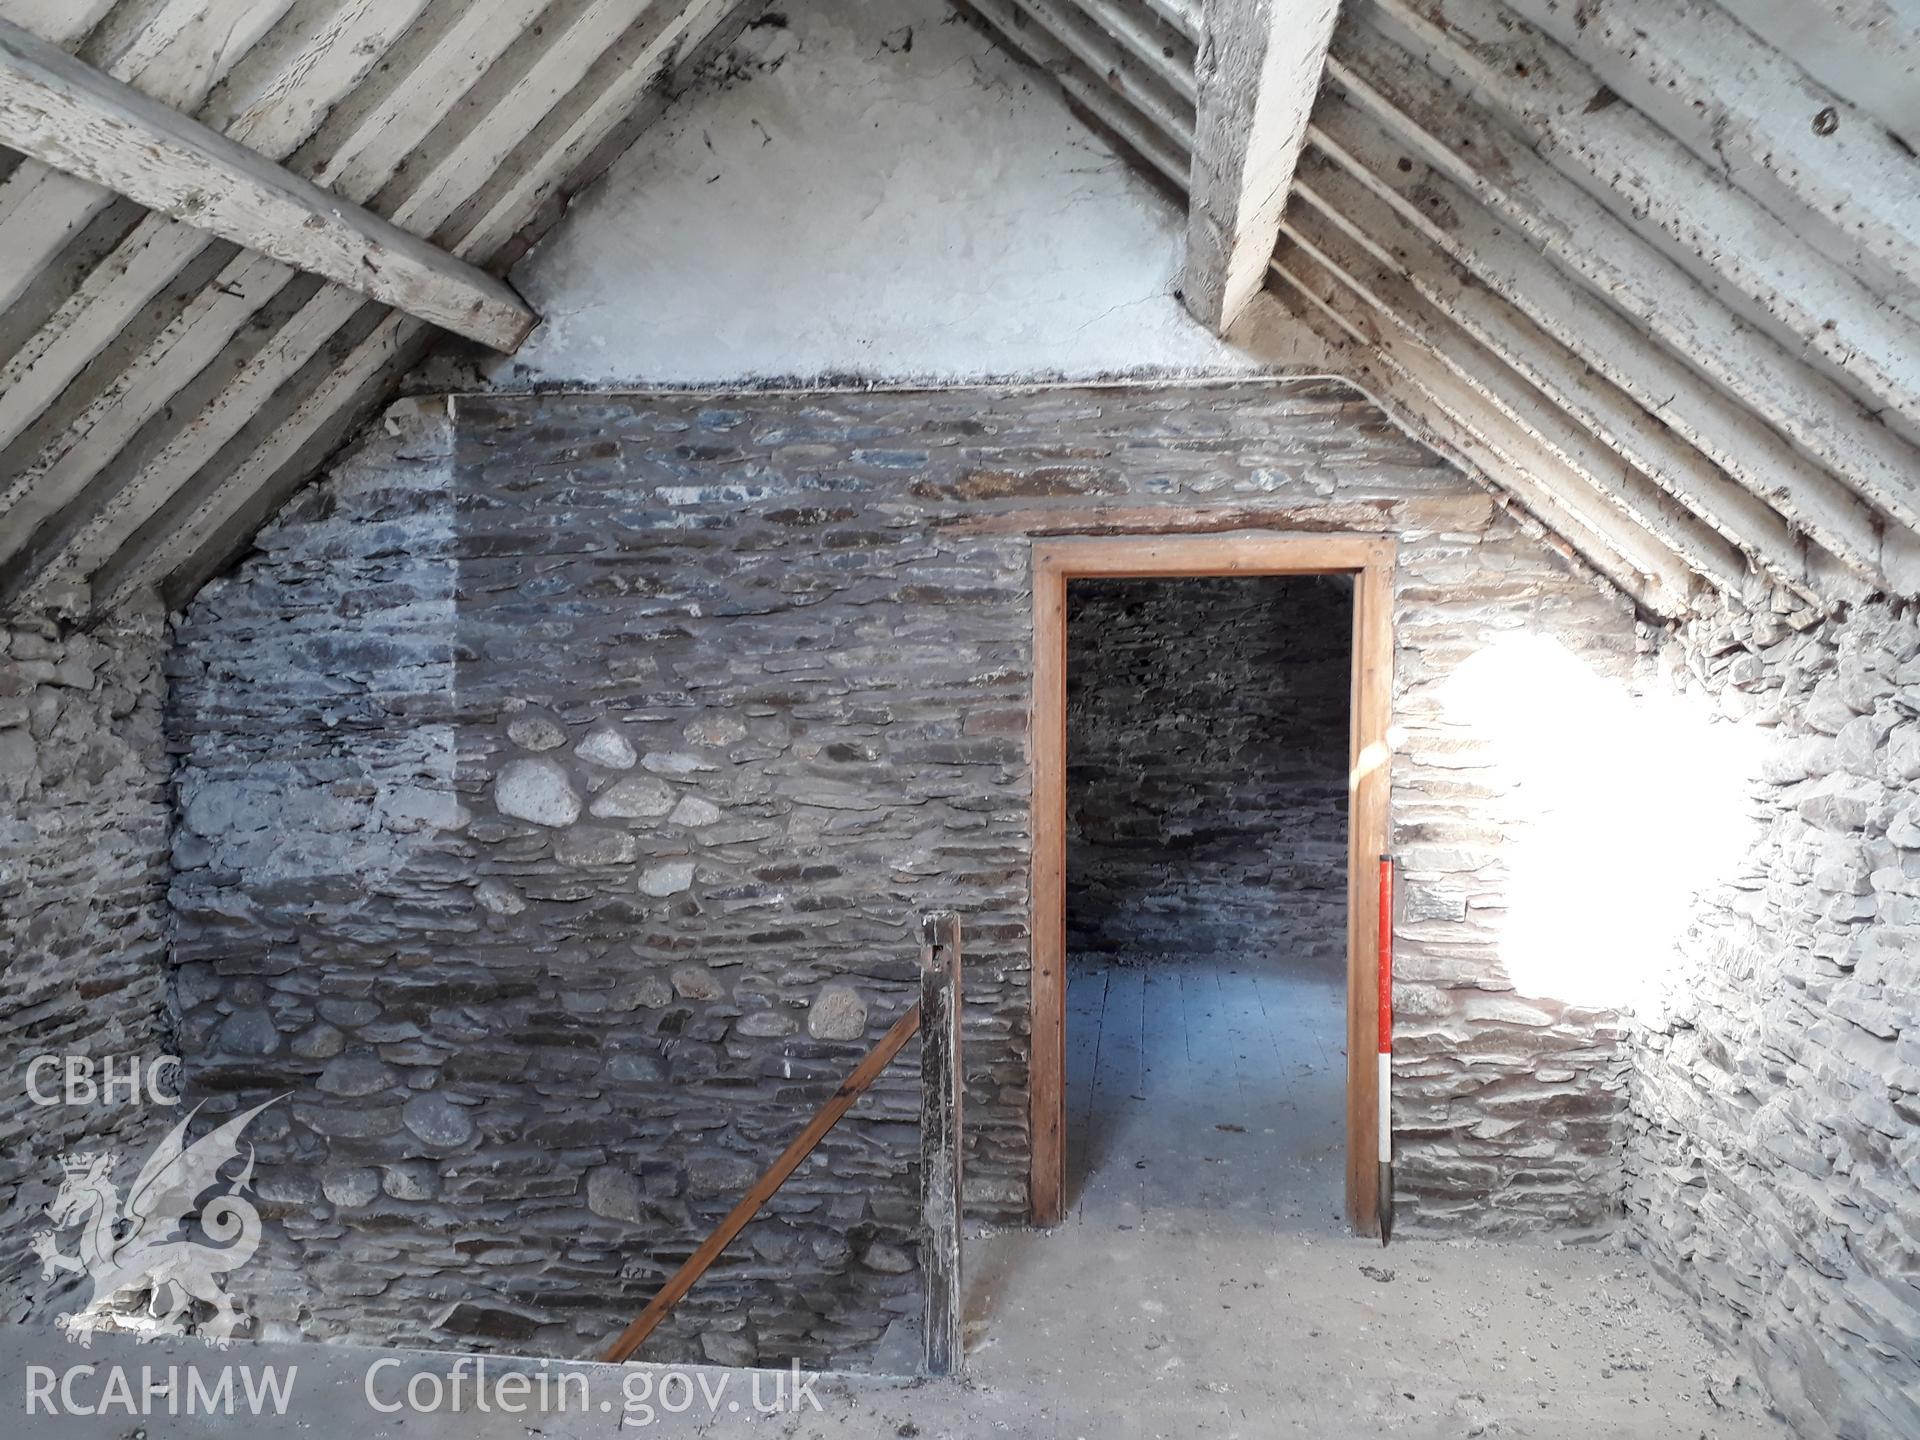 Bedroom 1, doorway to Bedroom 2. View north-west. 1m scale. Photographed as part of archaeological building recording conducted at Bryn Ysguboriau, Llanelidan, Denbighshire, carried out by Archaeology Wales, 2018. Project no. P2587.